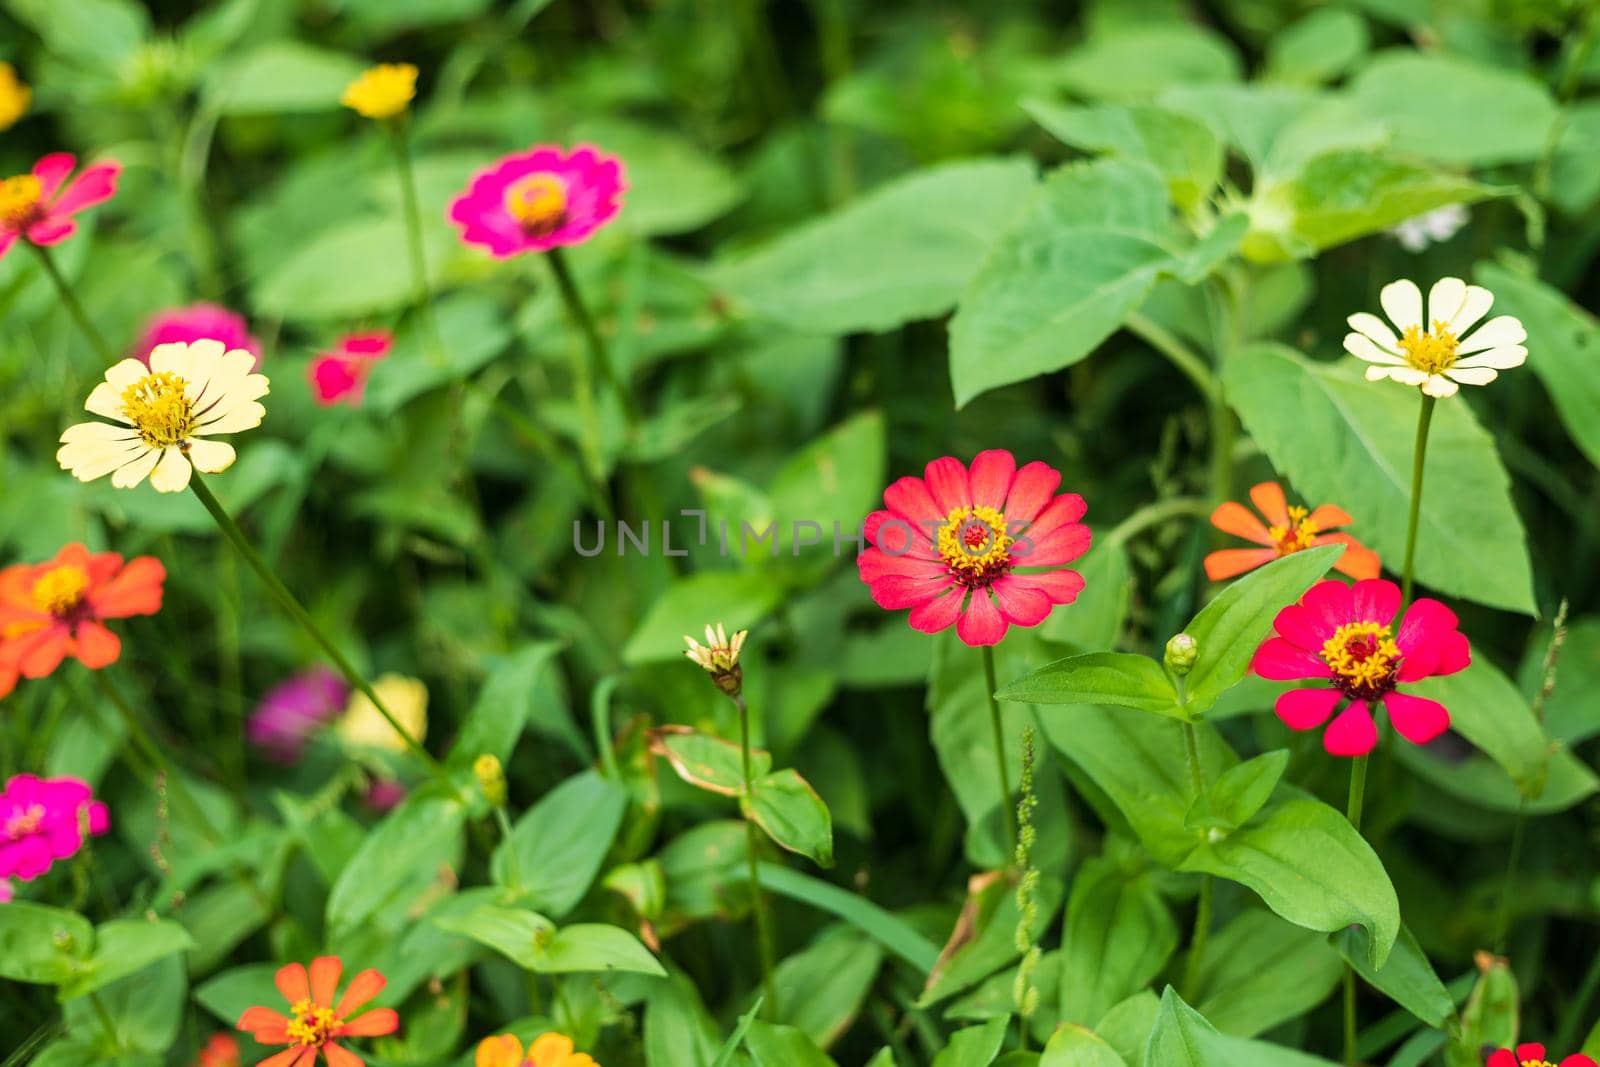 Common Zinnia (elegant zinnia) beautifully with green leaves background in the garden.